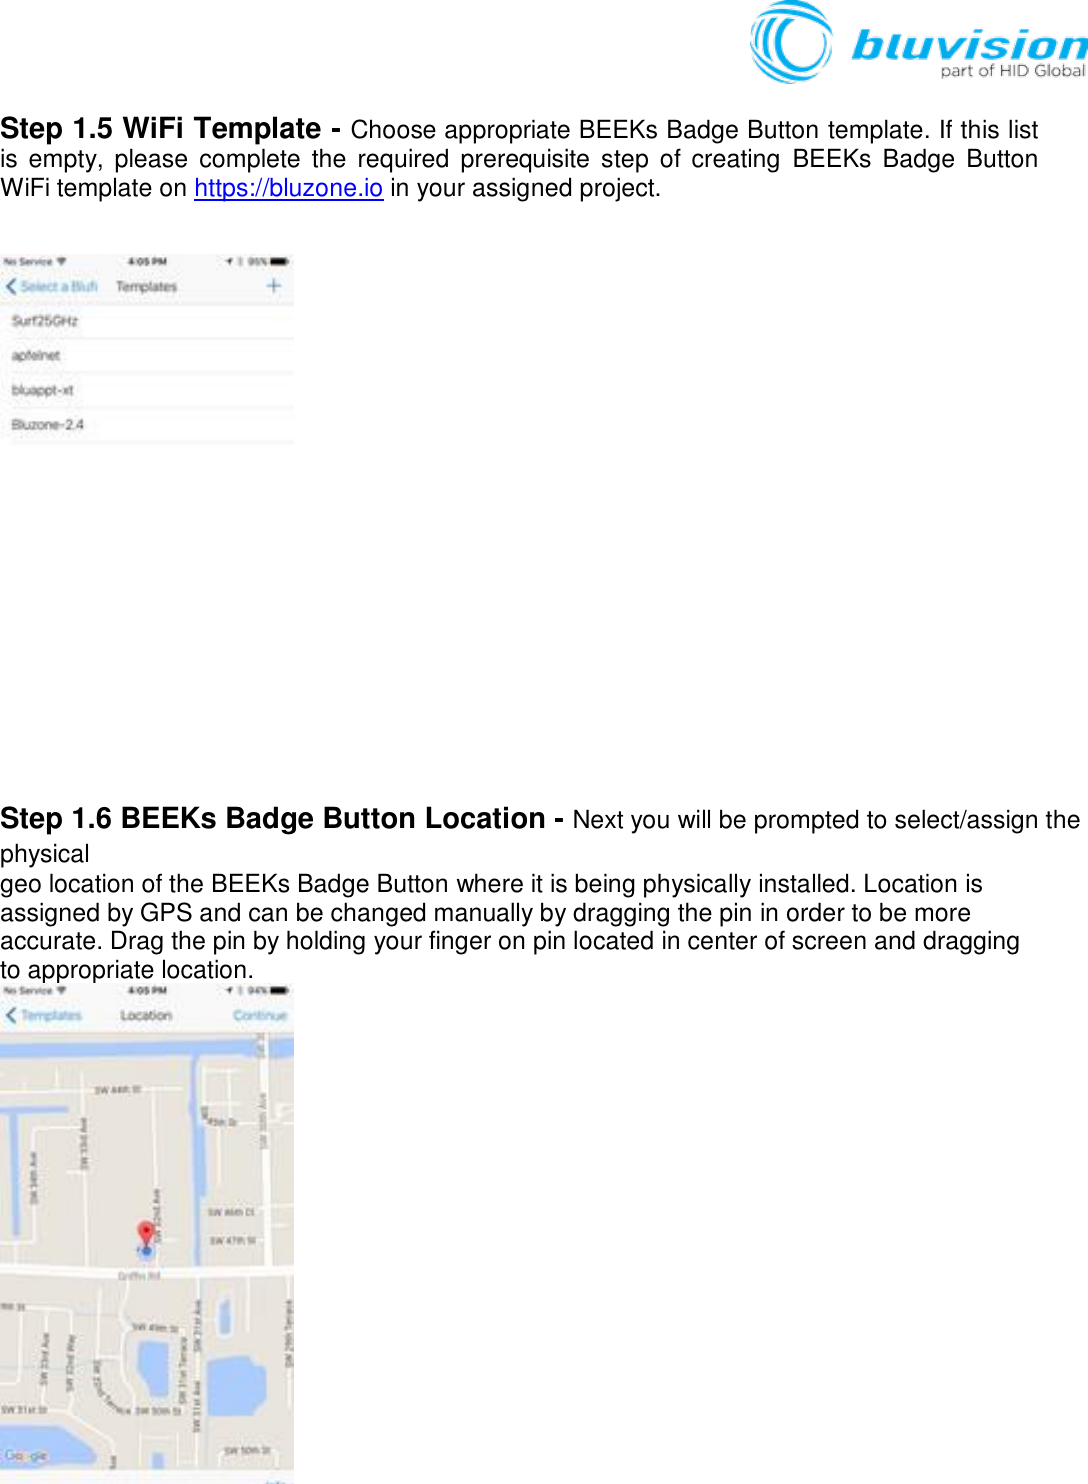   Step 1.5 WiFi Template - Choose appropriate BEEKs Badge Button template. If this list is empty,  please  complete the  required  prerequisite  step  of creating  BEEKs  Badge  Button WiFi template on https://bluzone.io in your assigned project.              Step 1.6 BEEKs Badge Button Location - Next you will be prompted to select/assign the physical geo location of the BEEKs Badge Button where it is being physically installed. Location is assigned by GPS and can be changed manually by dragging the pin in order to be more accurate. Drag the pin by holding your finger on pin located in center of screen and dragging to appropriate location.  